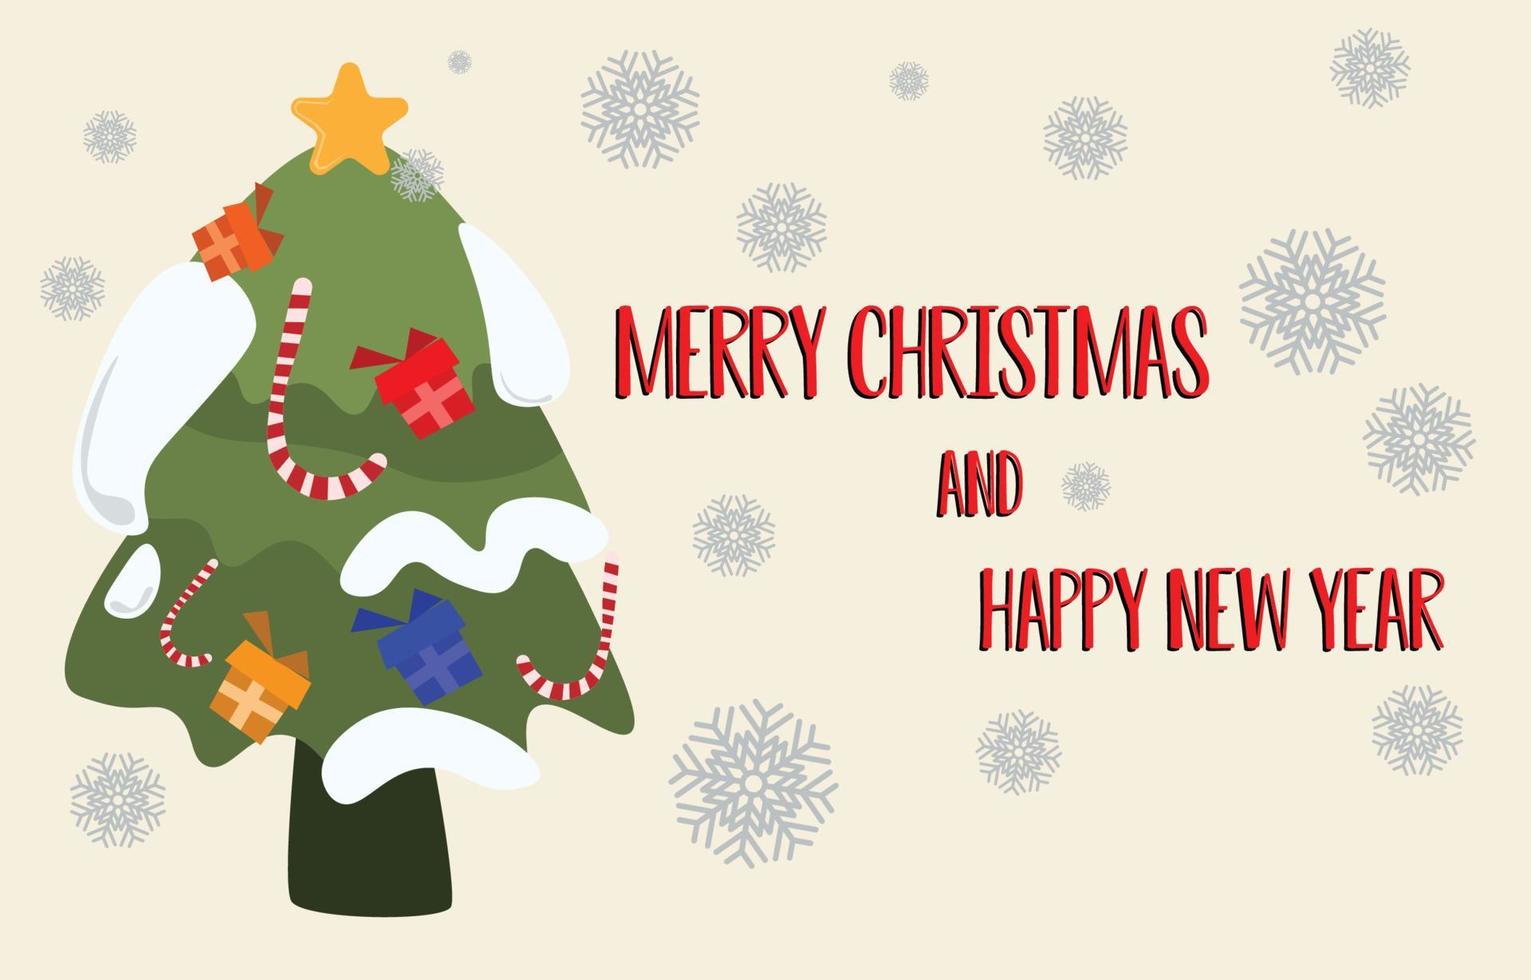 Christmas Background Vector with snowflakes and  gift on tree,santa with Merry Christmas message and happy new year for wallpaper or greeting cards